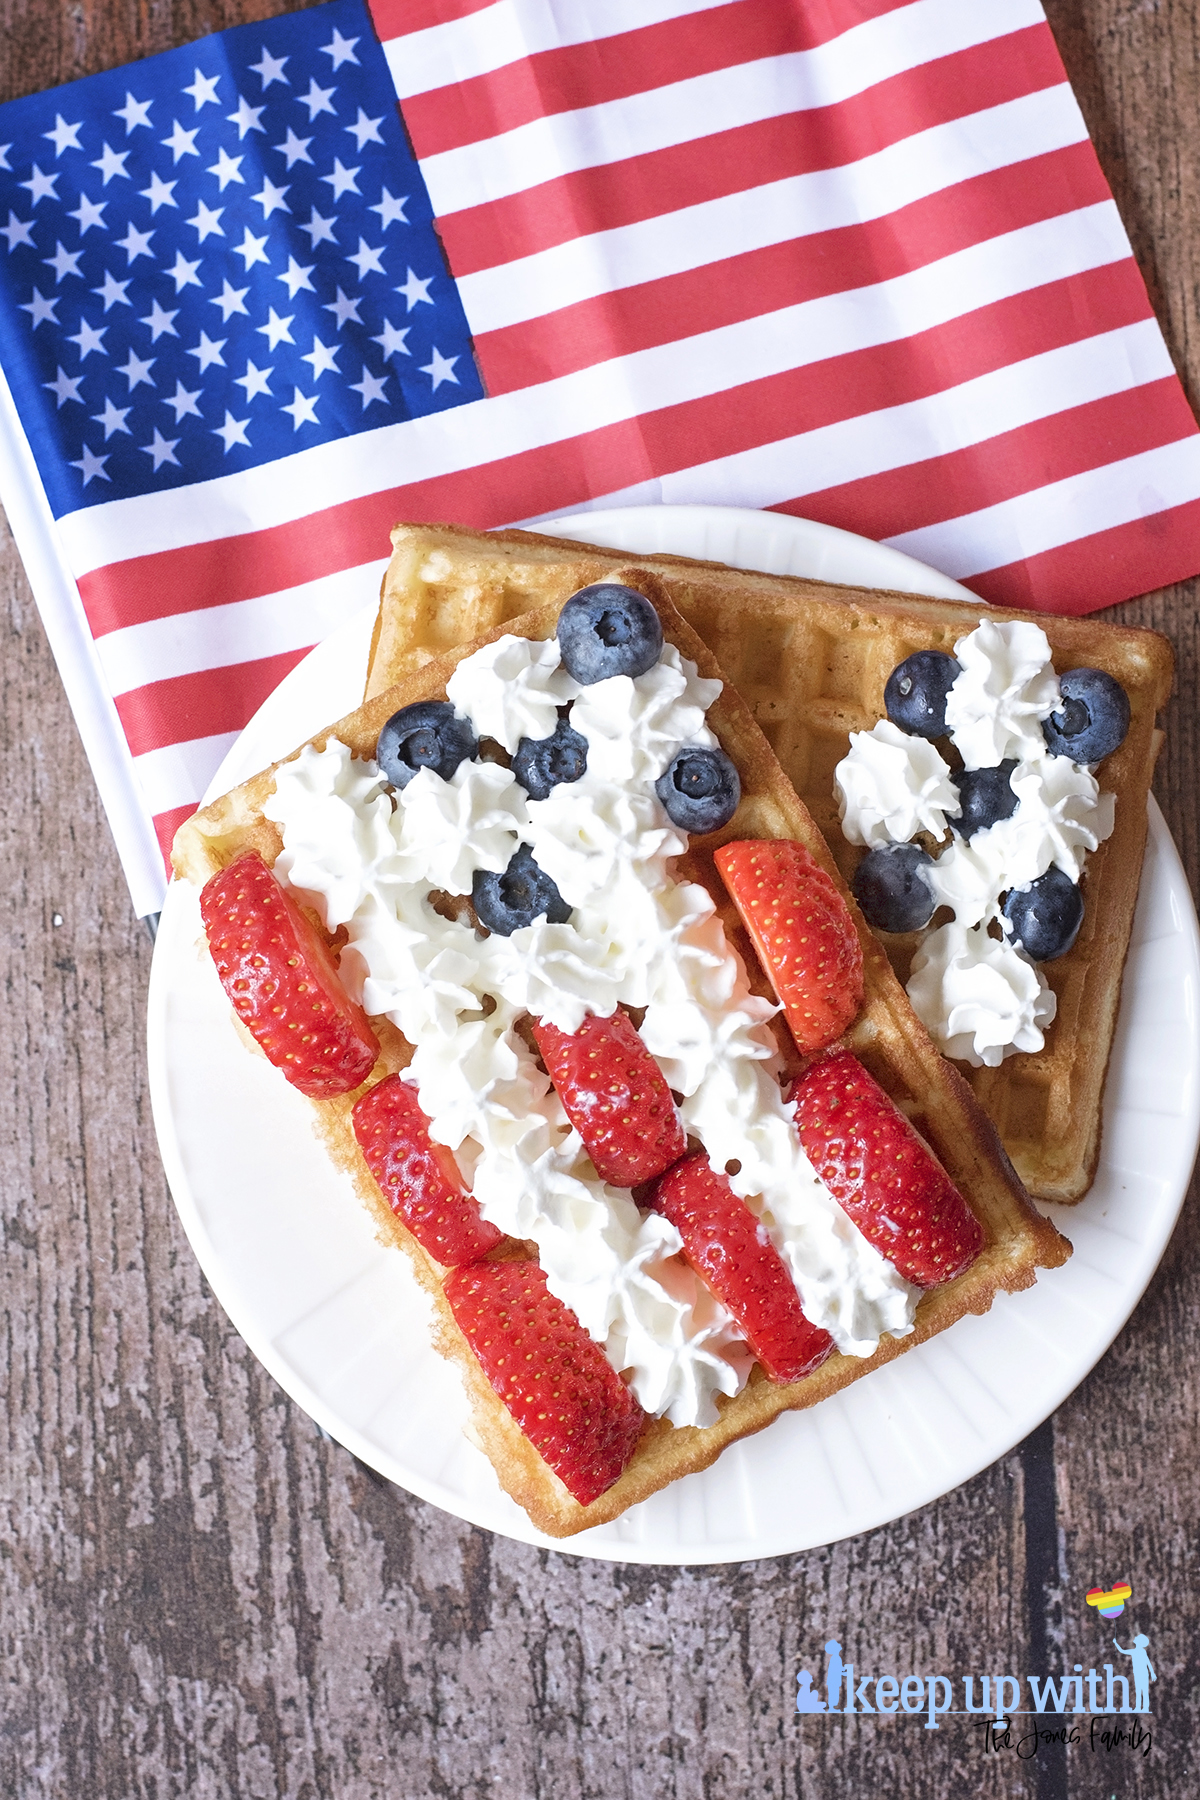 Image shows rectangular sweet breakfast waffles on a white vera wang plate. The waffles are being decorated in the style of the American Flag. There are sliced strawberries for the red stripes, blueberries for the space around the stars, and cream is piped in star shapes as the white stars and stripes. The plate is set on a dark hardwood background and there is a small American Flag next to it. Image by Sara-Jayne Jones, Keep Up With The Jones Family.